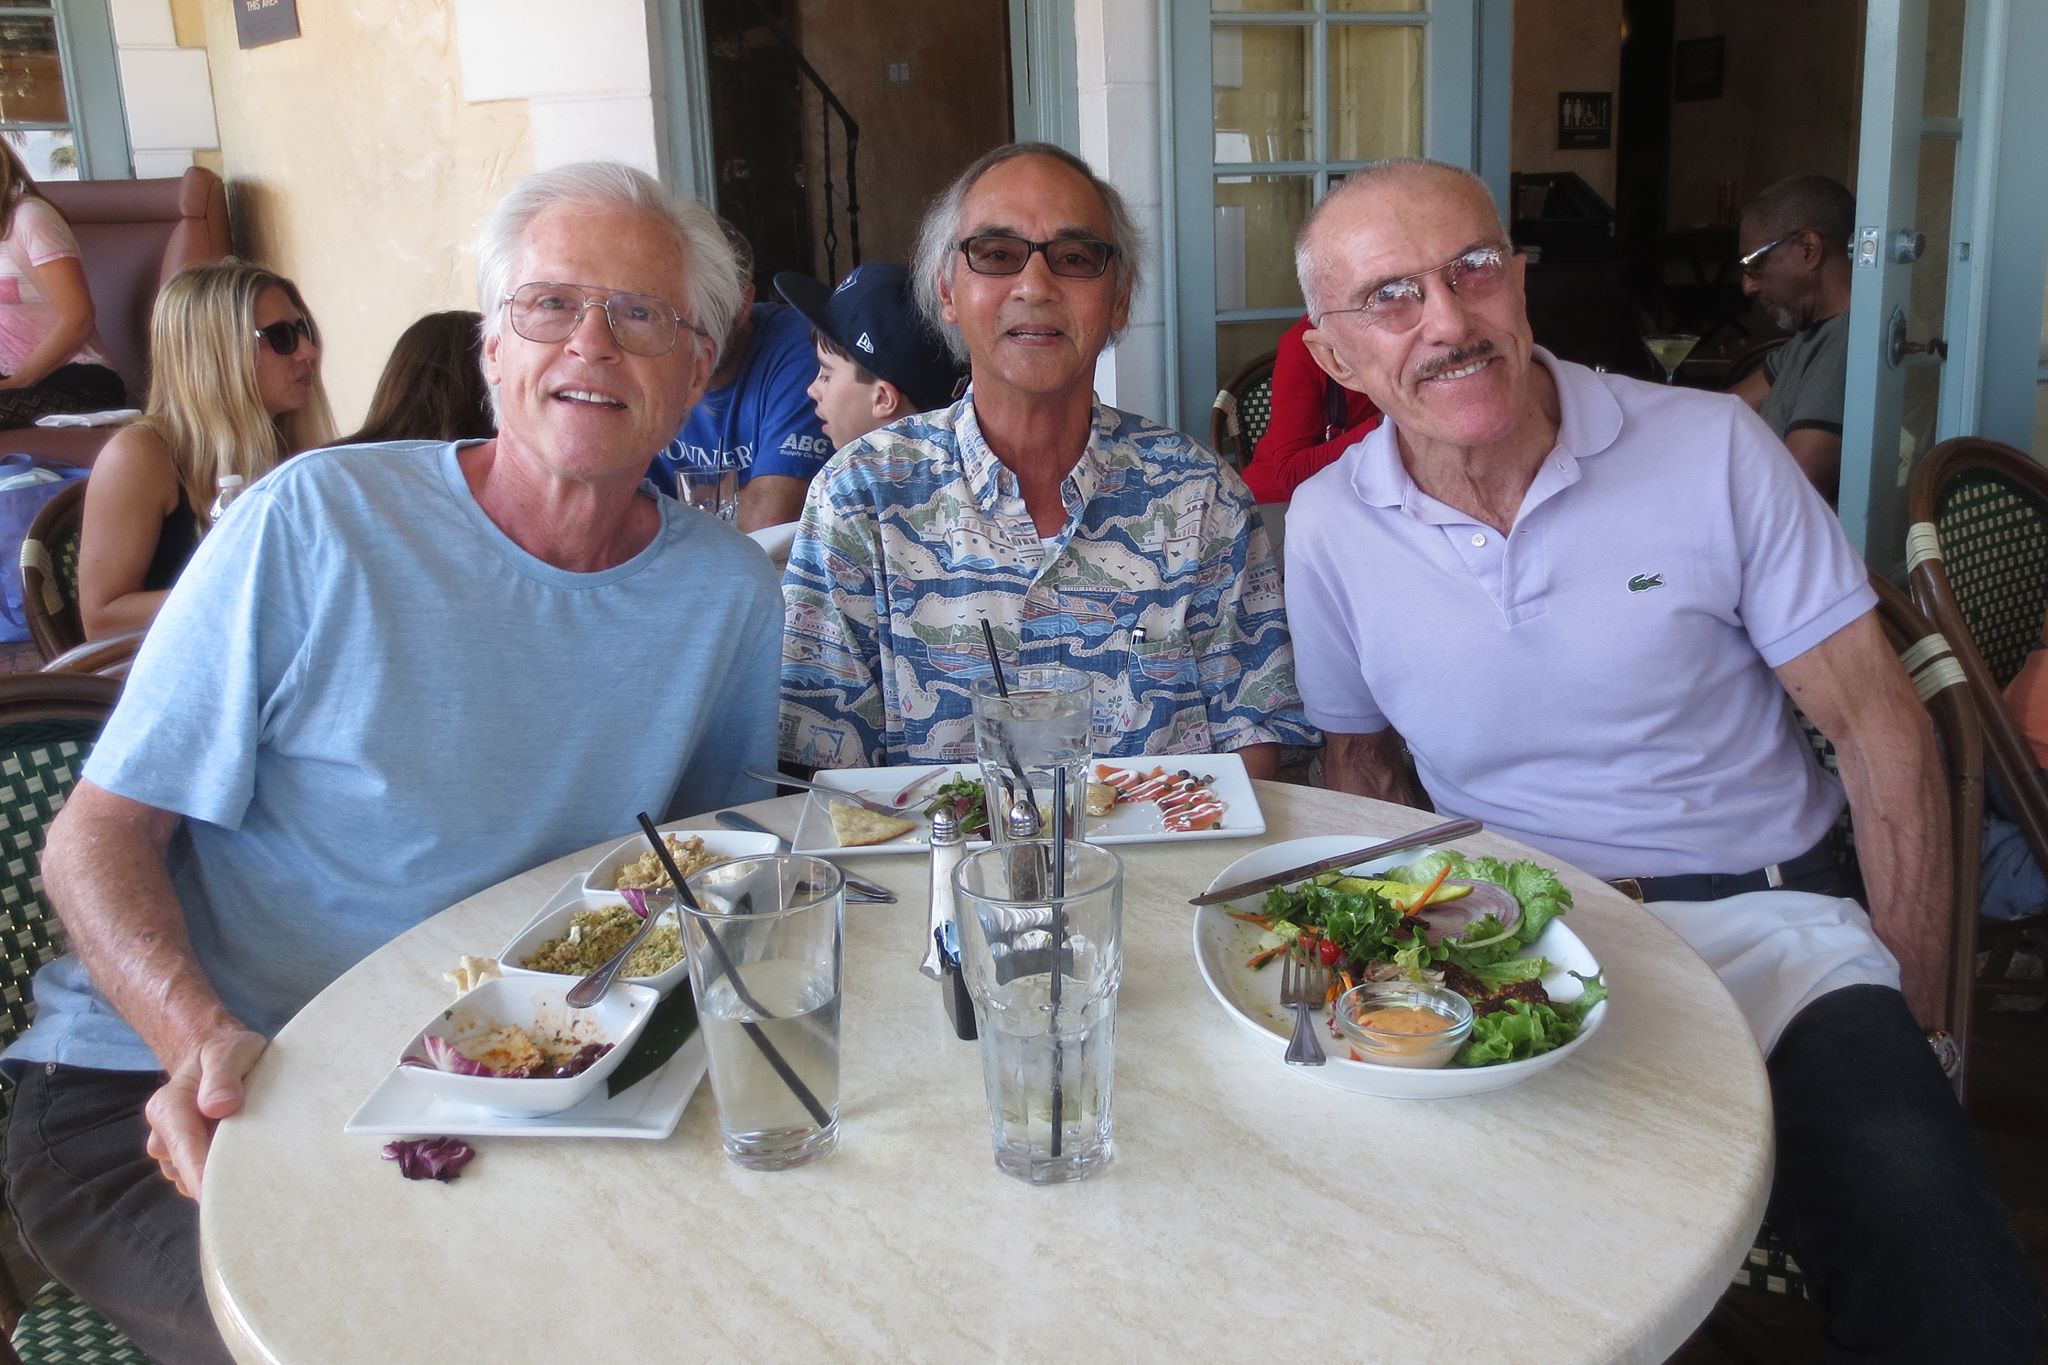 People in the image, from left to right: John Van der Slice, Dennis Kam, and Jim Ostryne (Fort Lauderdale, 2015)